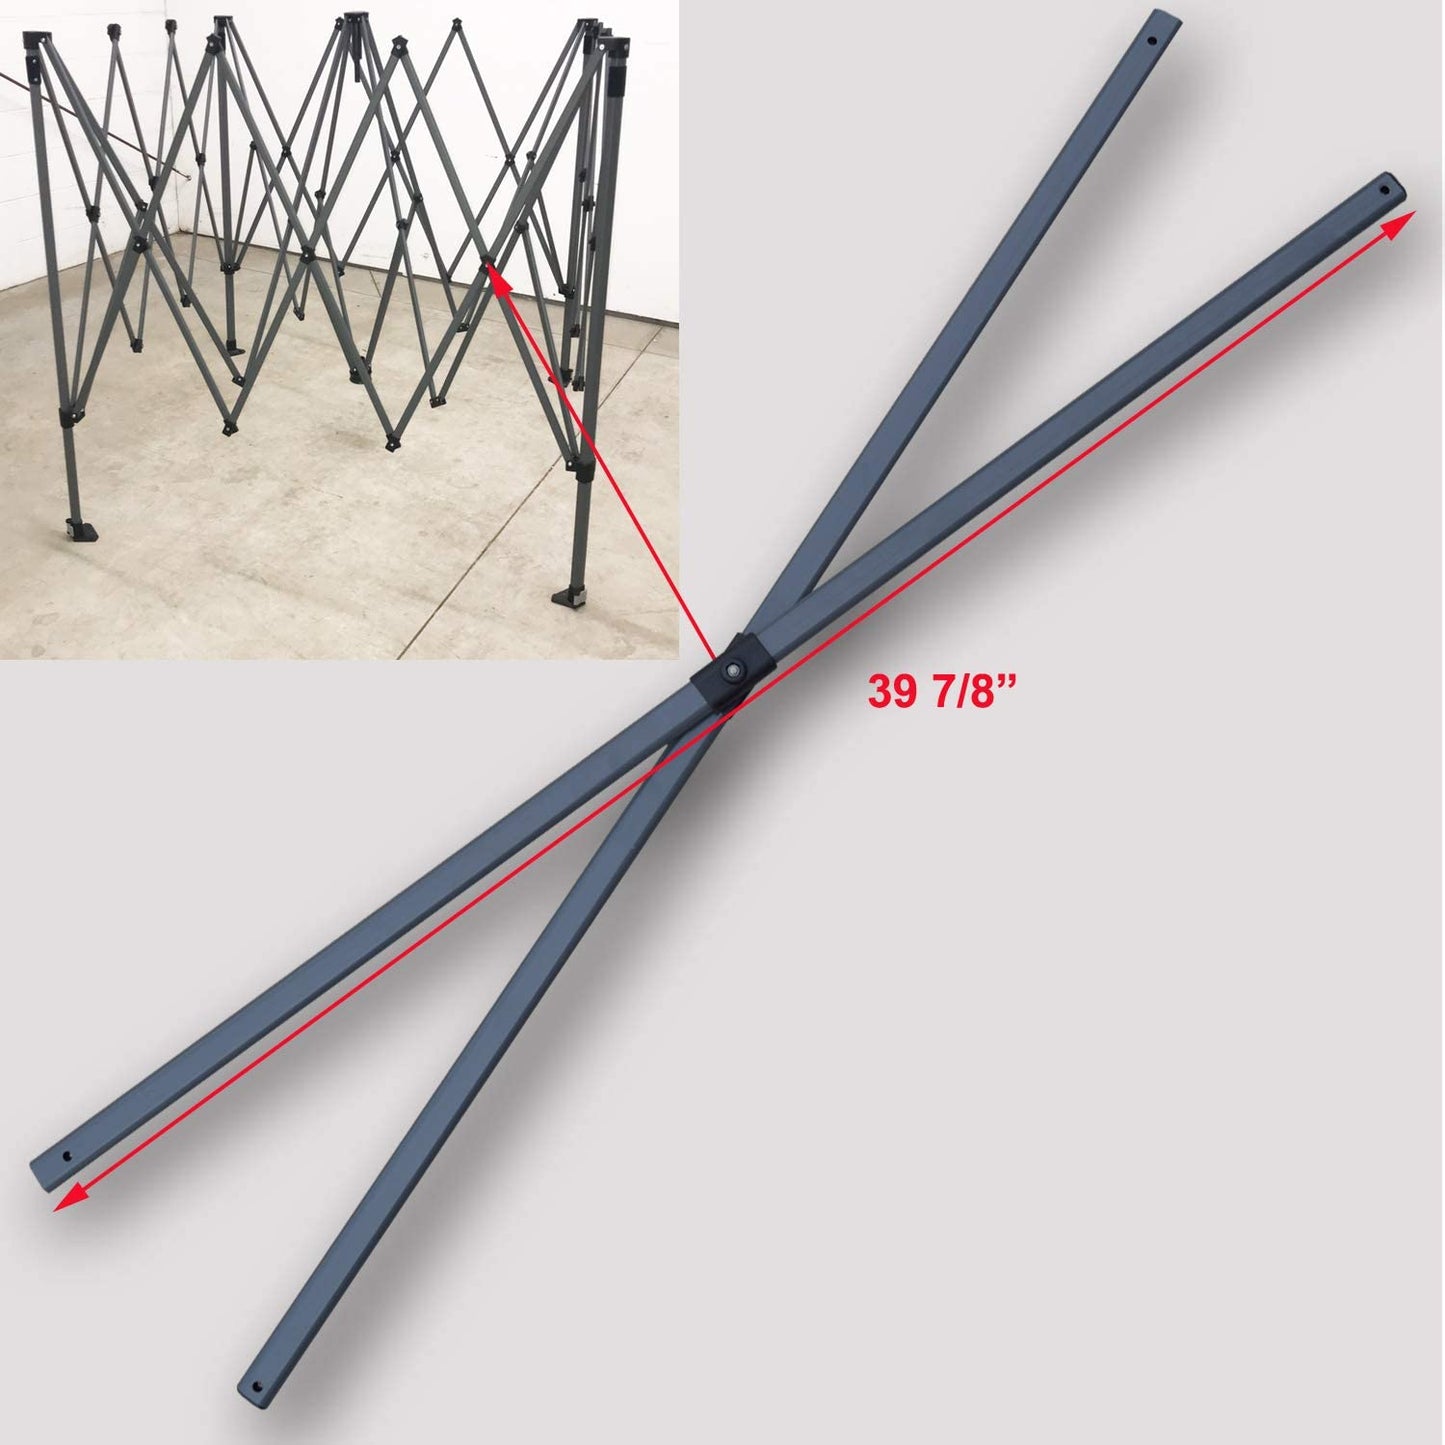 The image shows a scissor-style expandable metal barrier in a fully extended position, likely for crowd control or to block off restricted areas. On the right, there's a close-up of one of the scissor arms, detailed with a red line to indicate the measurement, which is marked as 39 7/8 inches, suggesting the length of the arm from pivot to end.